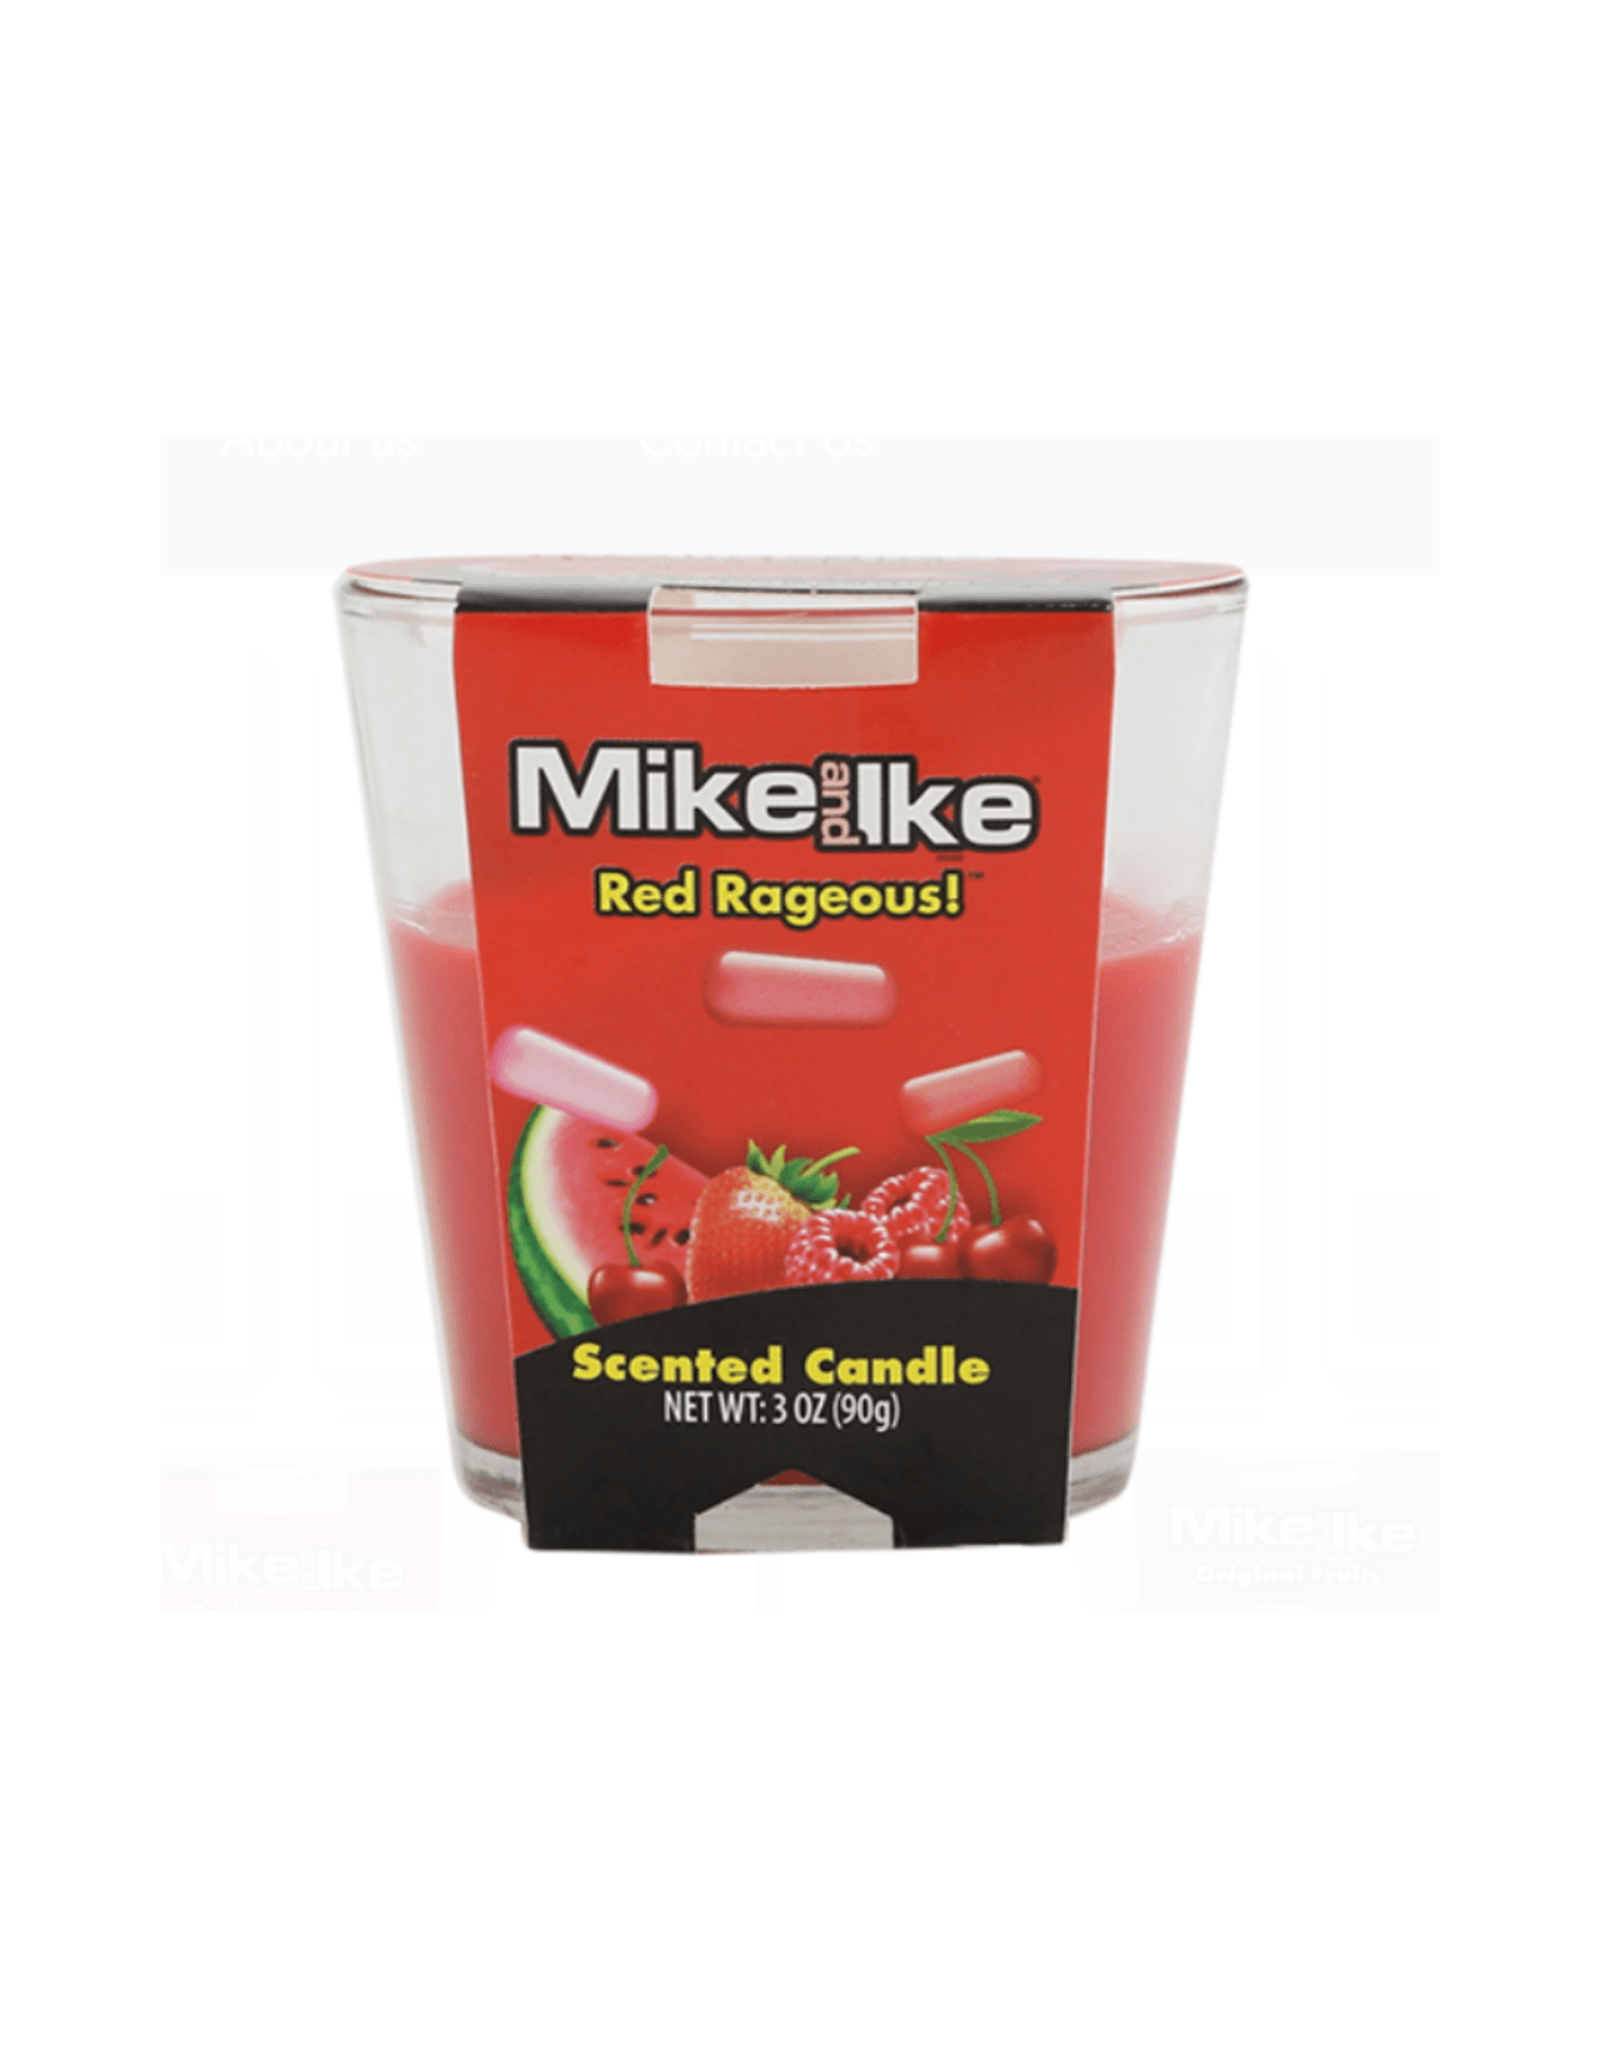 Mike & Ike Red Rageous Scented Candle